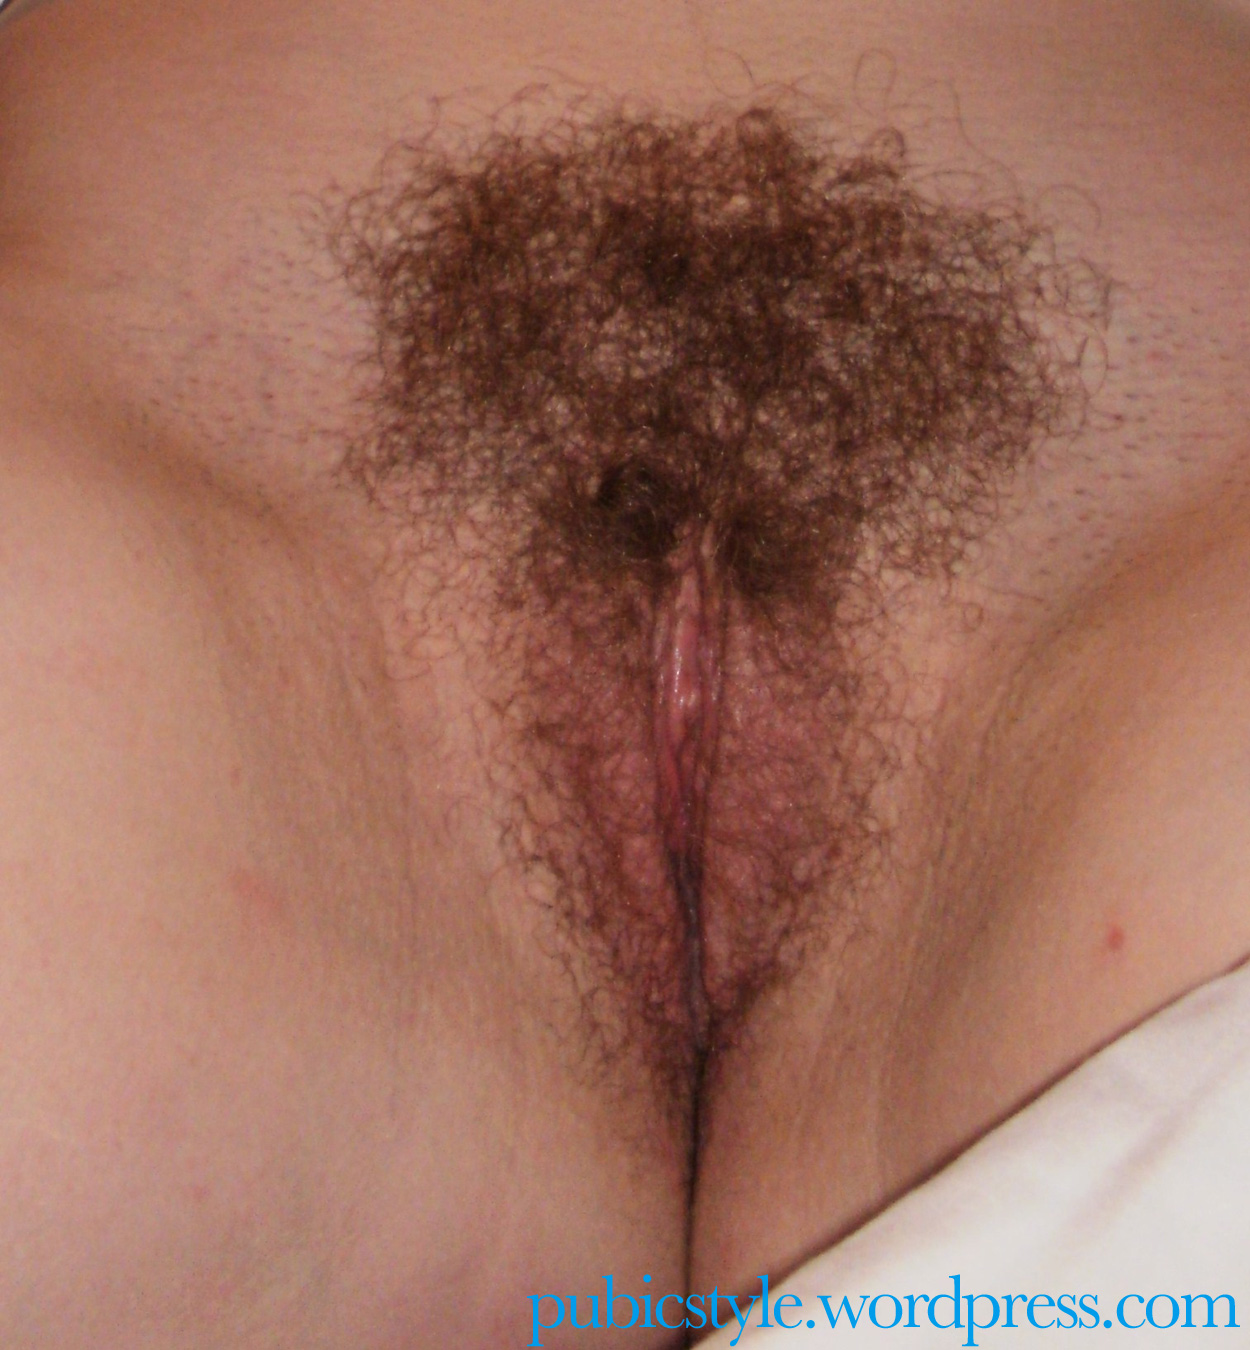 Pubic hair pussy picture shave